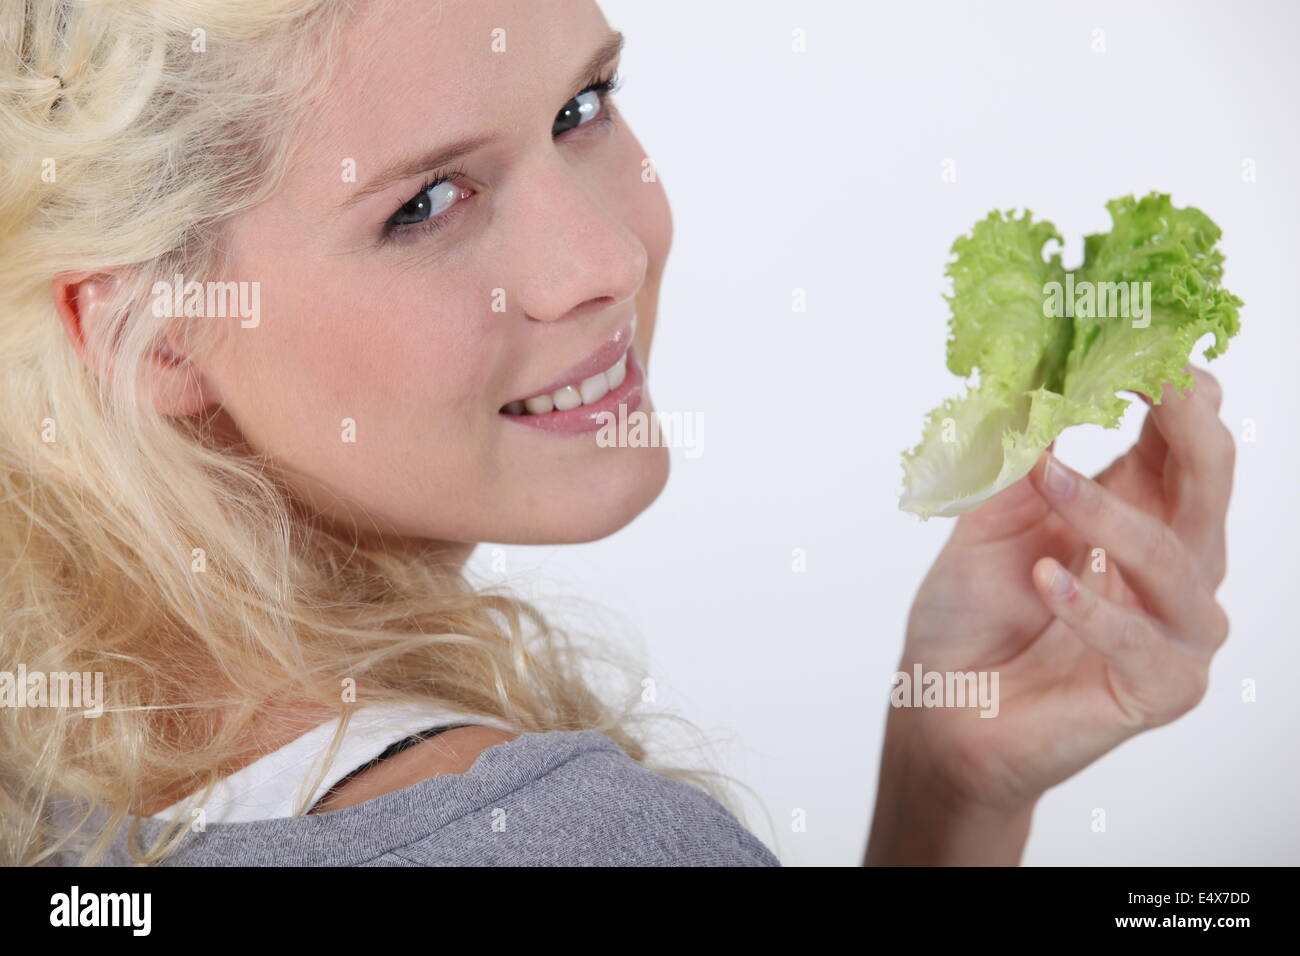 Attractive blond woman holding lettuce leaf Stock Photo